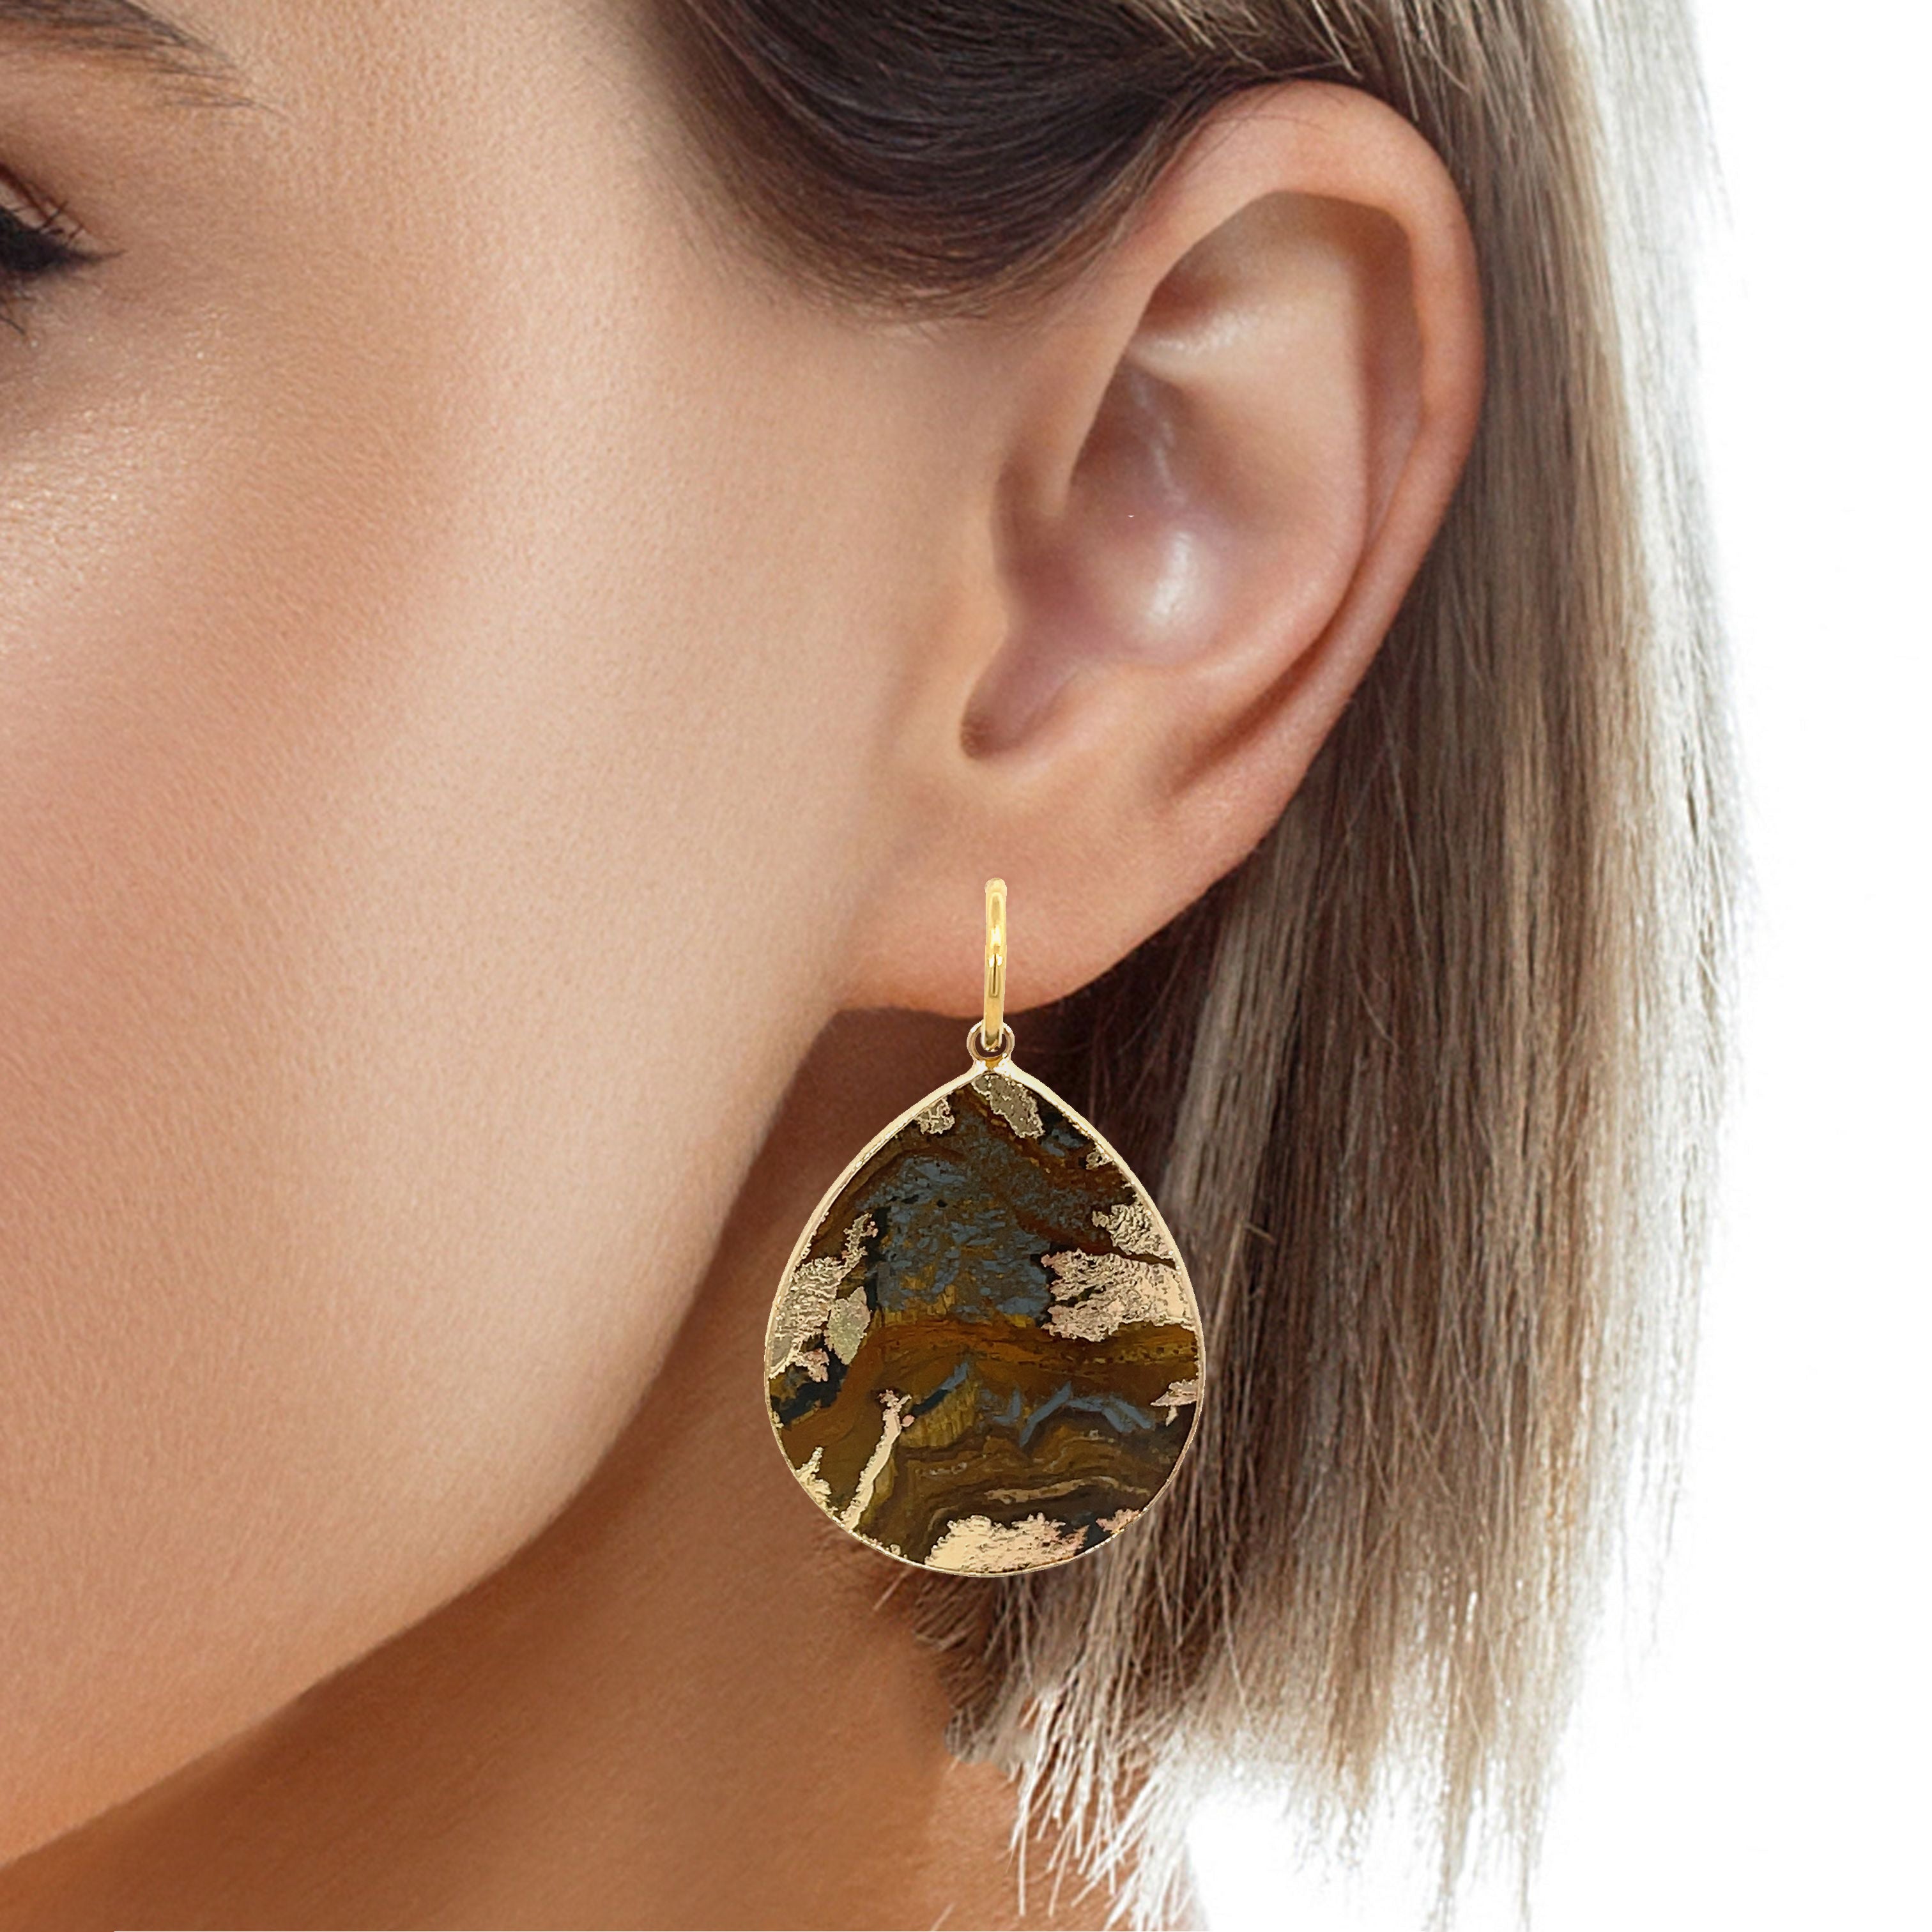 Discover Success with Heavenly Drop Earrings